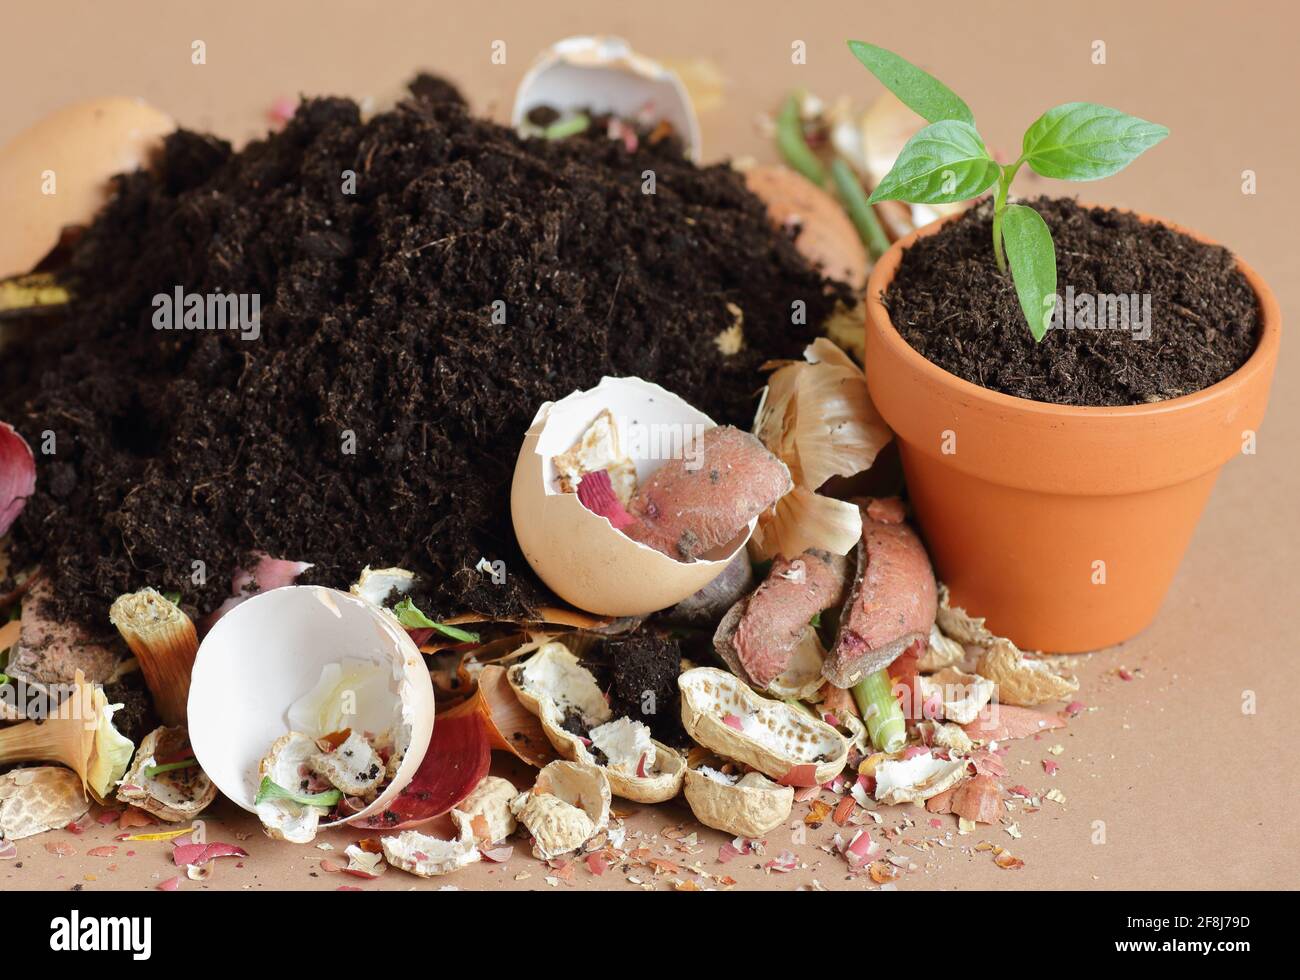 https://c8.alamy.com/comp/2F8J79D/organic-waste-heap-of-biodegradable-vegetable-compost-with-decomposed-organic-matter-on-top-and-seedling-in-terracota-flower-pot-closeup-zero-waste-2F8J79D.jpg